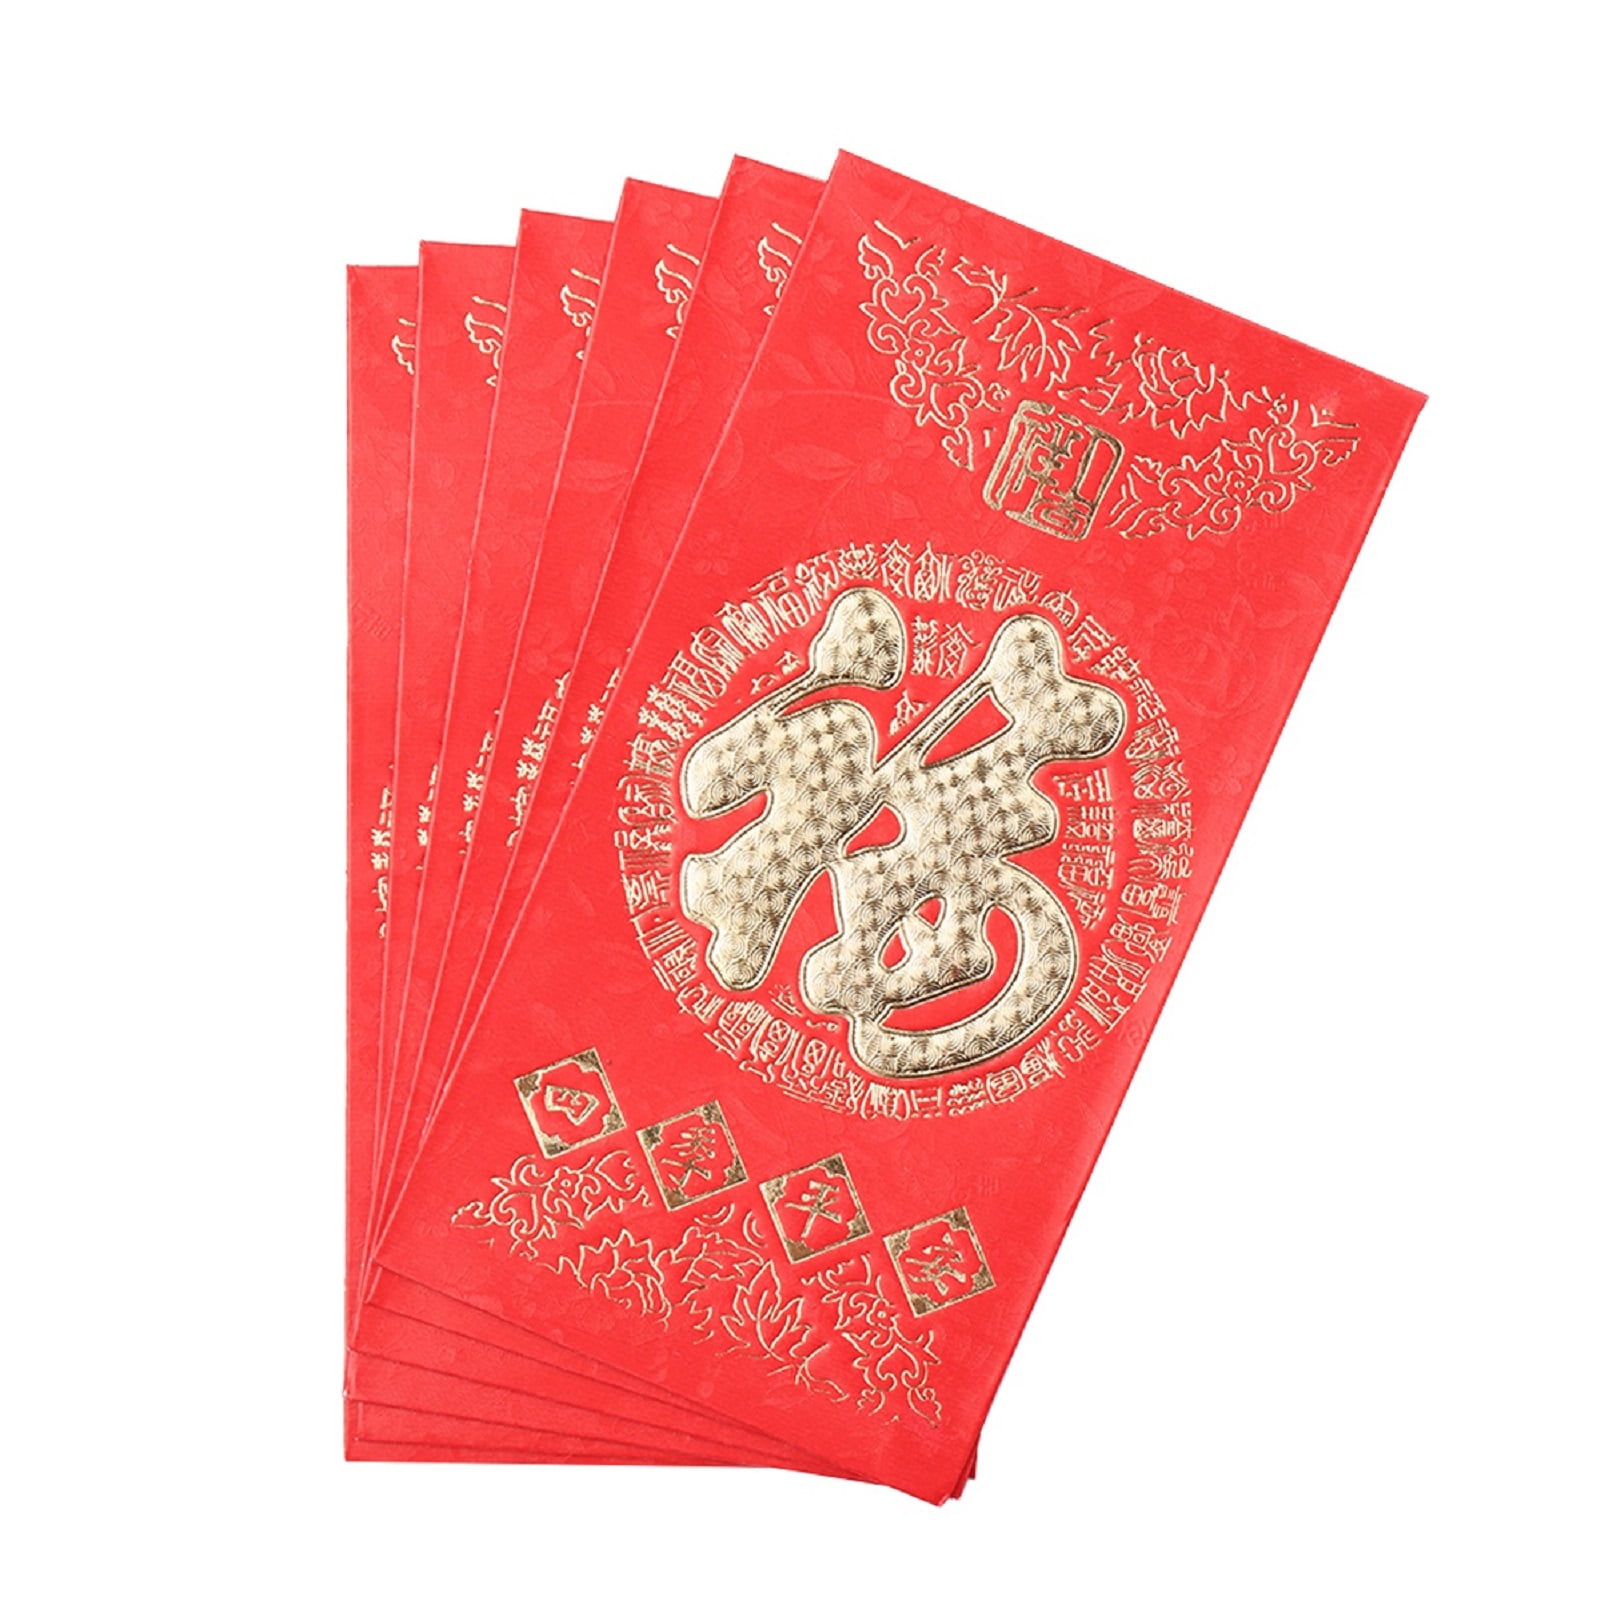 Andoer 21 Chinese New Year Red Envelope Chinese Zodiac Year Of The Ox Cartoon Image Spring Festival Red Packet Lucky Money Envelopes Hong Bao Pack Of 6 Walmart Com